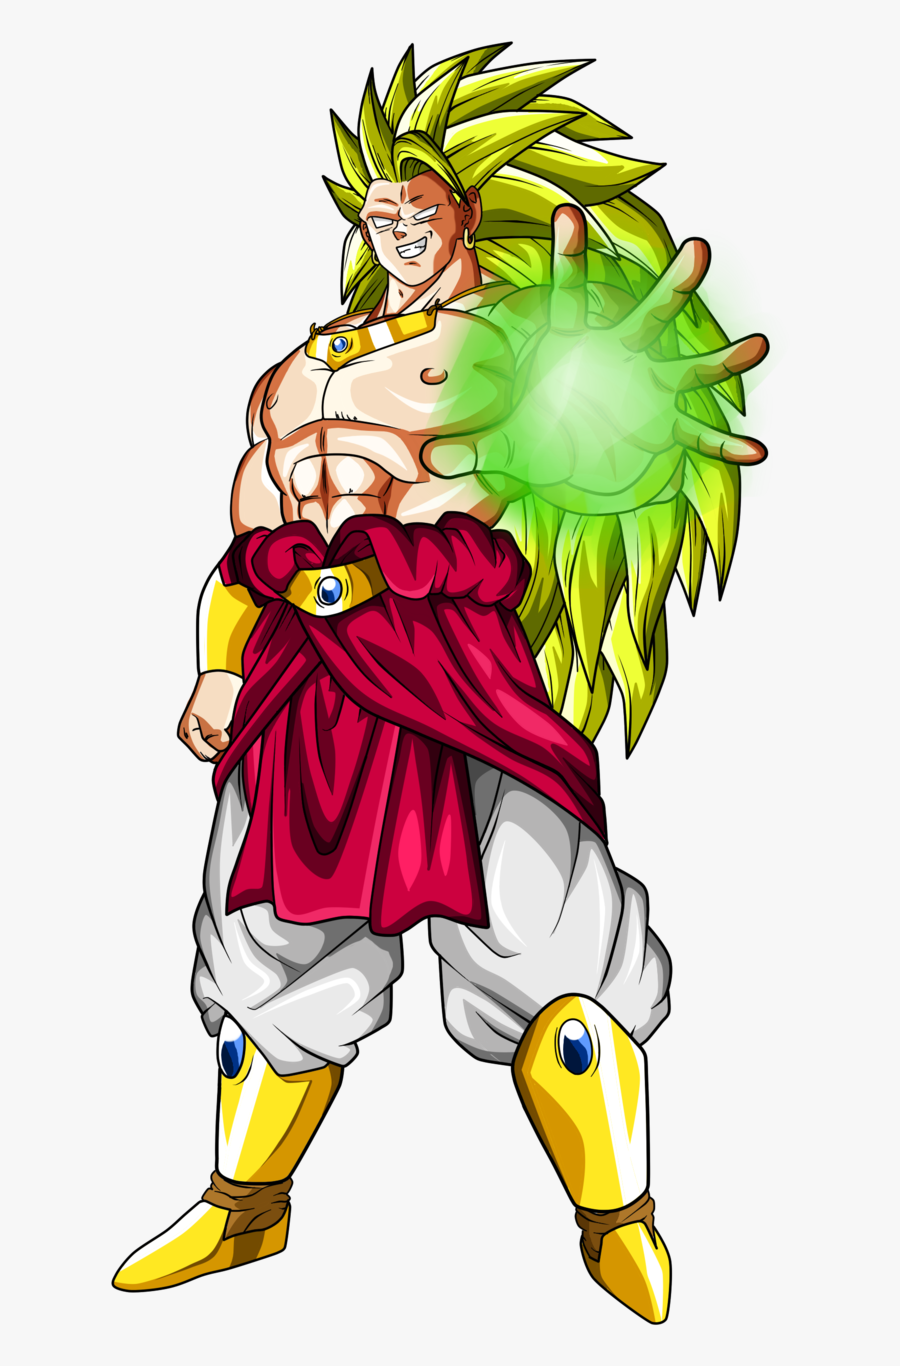 Dragon Ball Z Broly Png, Transparent Clipart